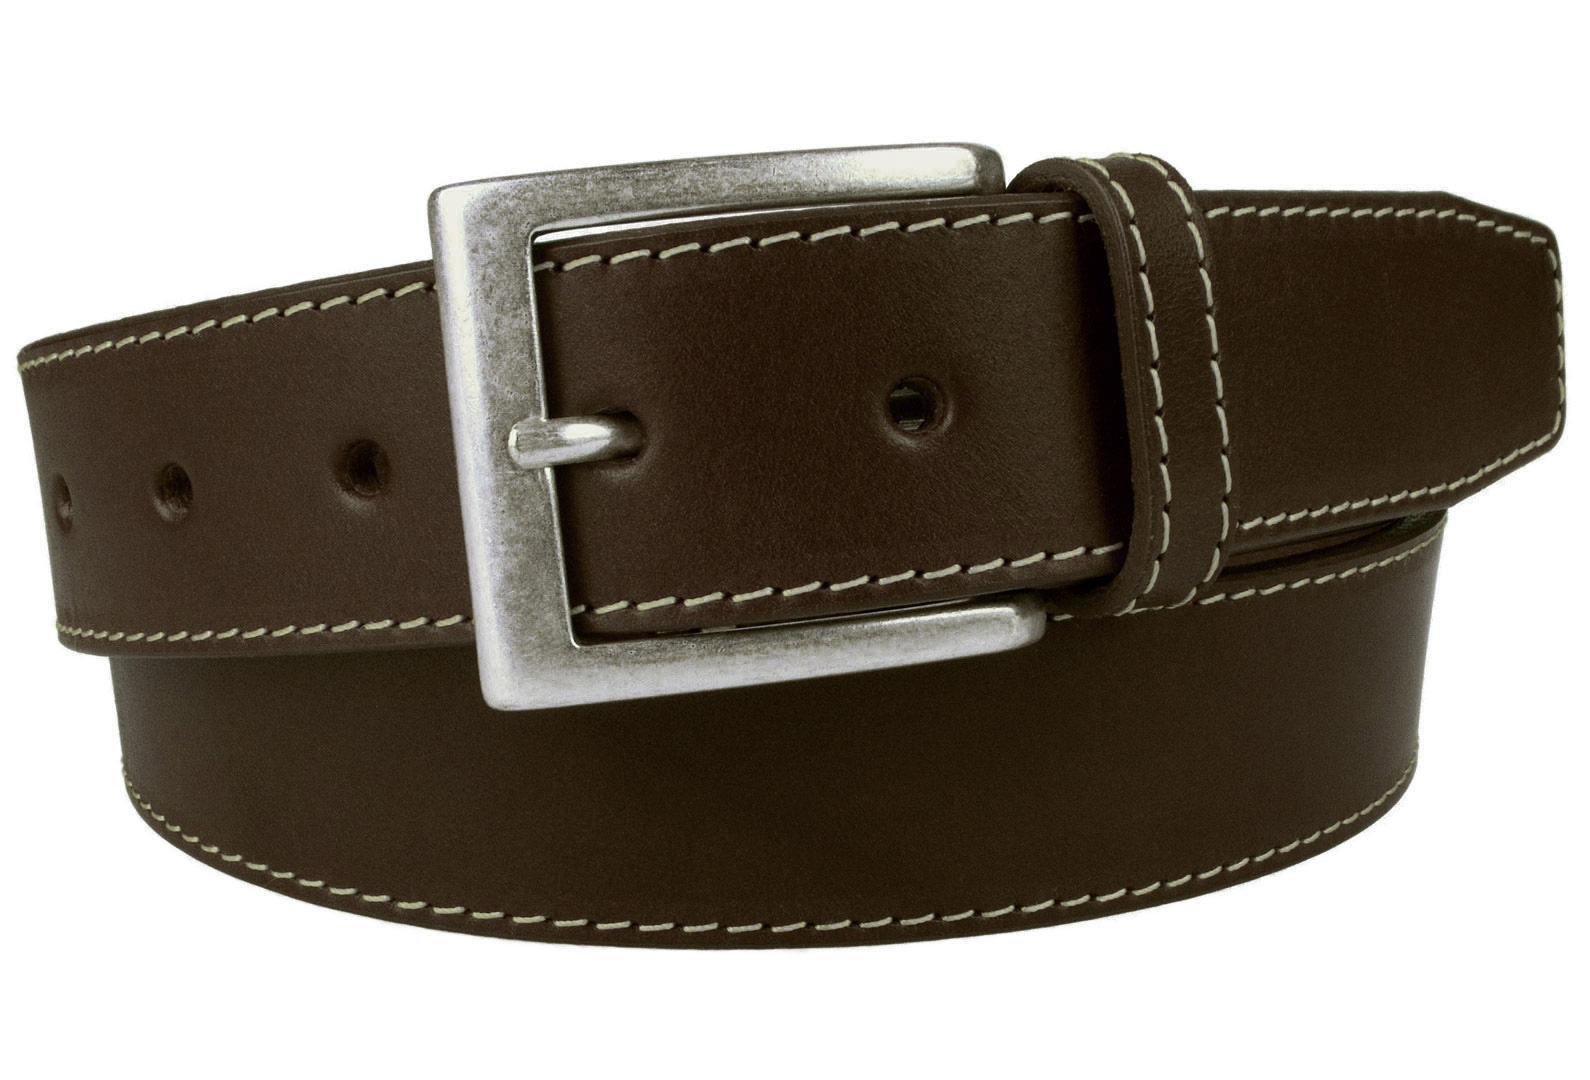 Brown Leather Belt With Contrasting Stitched Edge And Old Silver Plated Buckle - Belt Designs